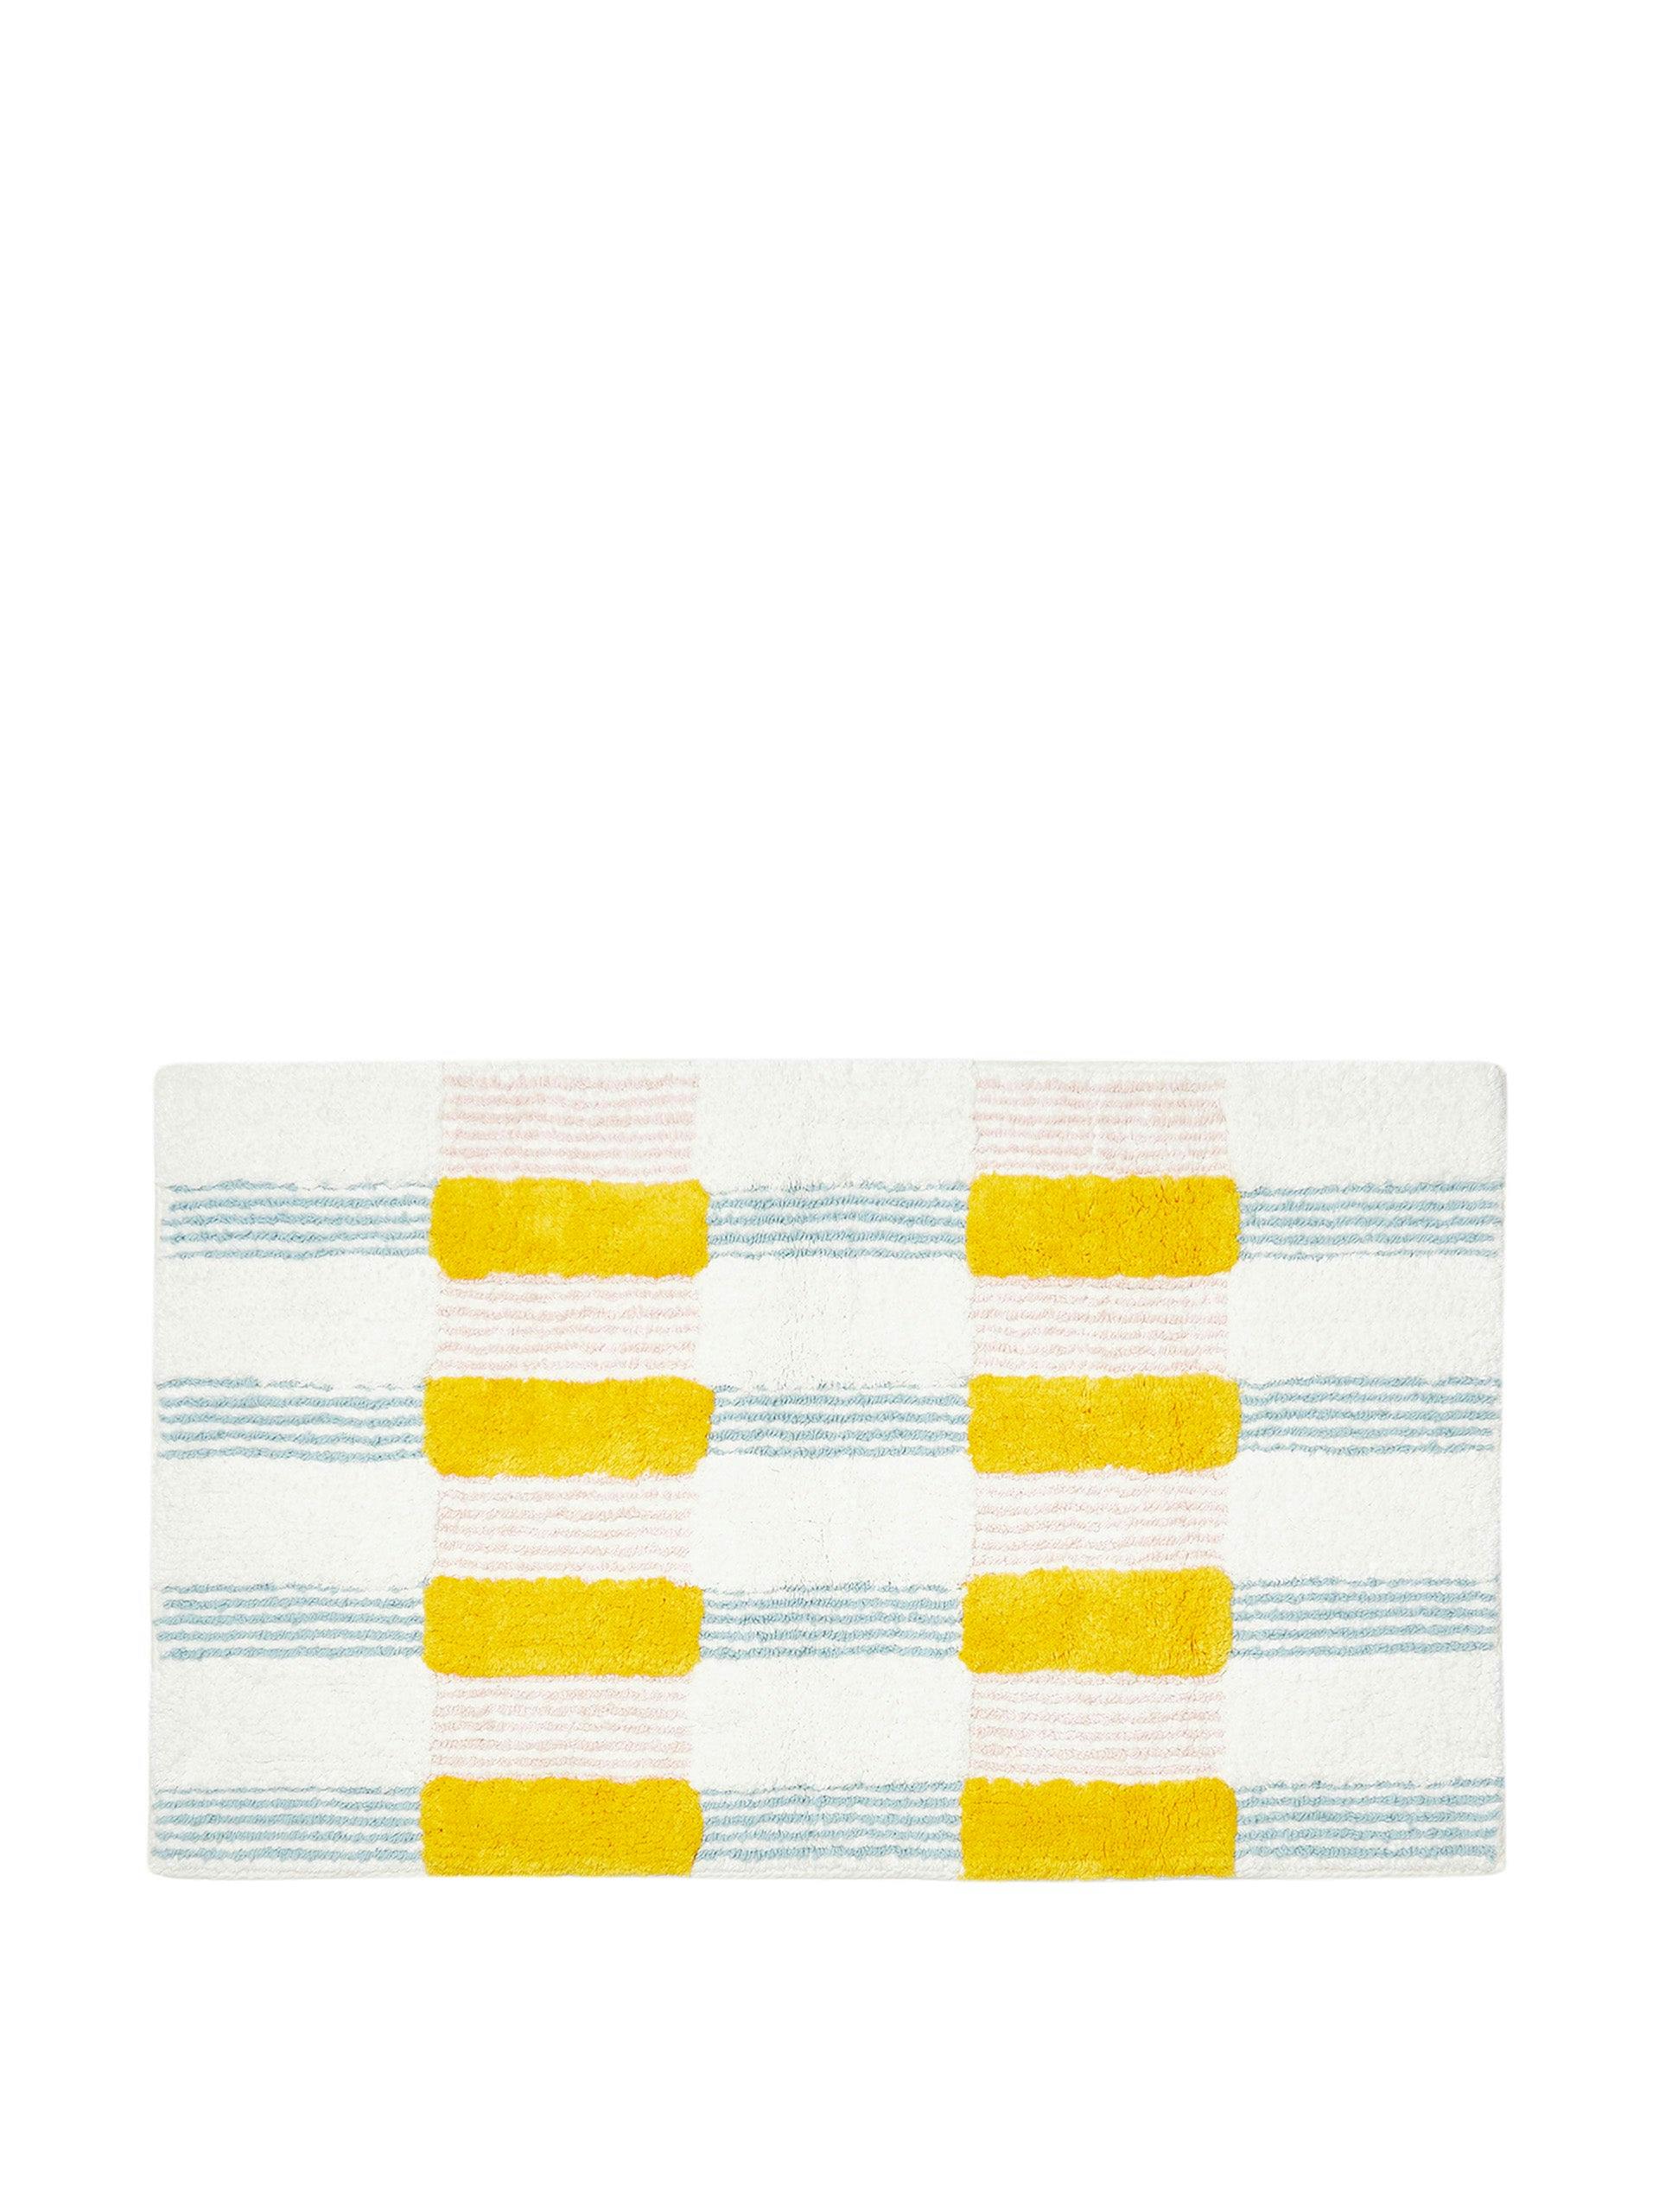 Large bath mat in yellow and blue checked pattern